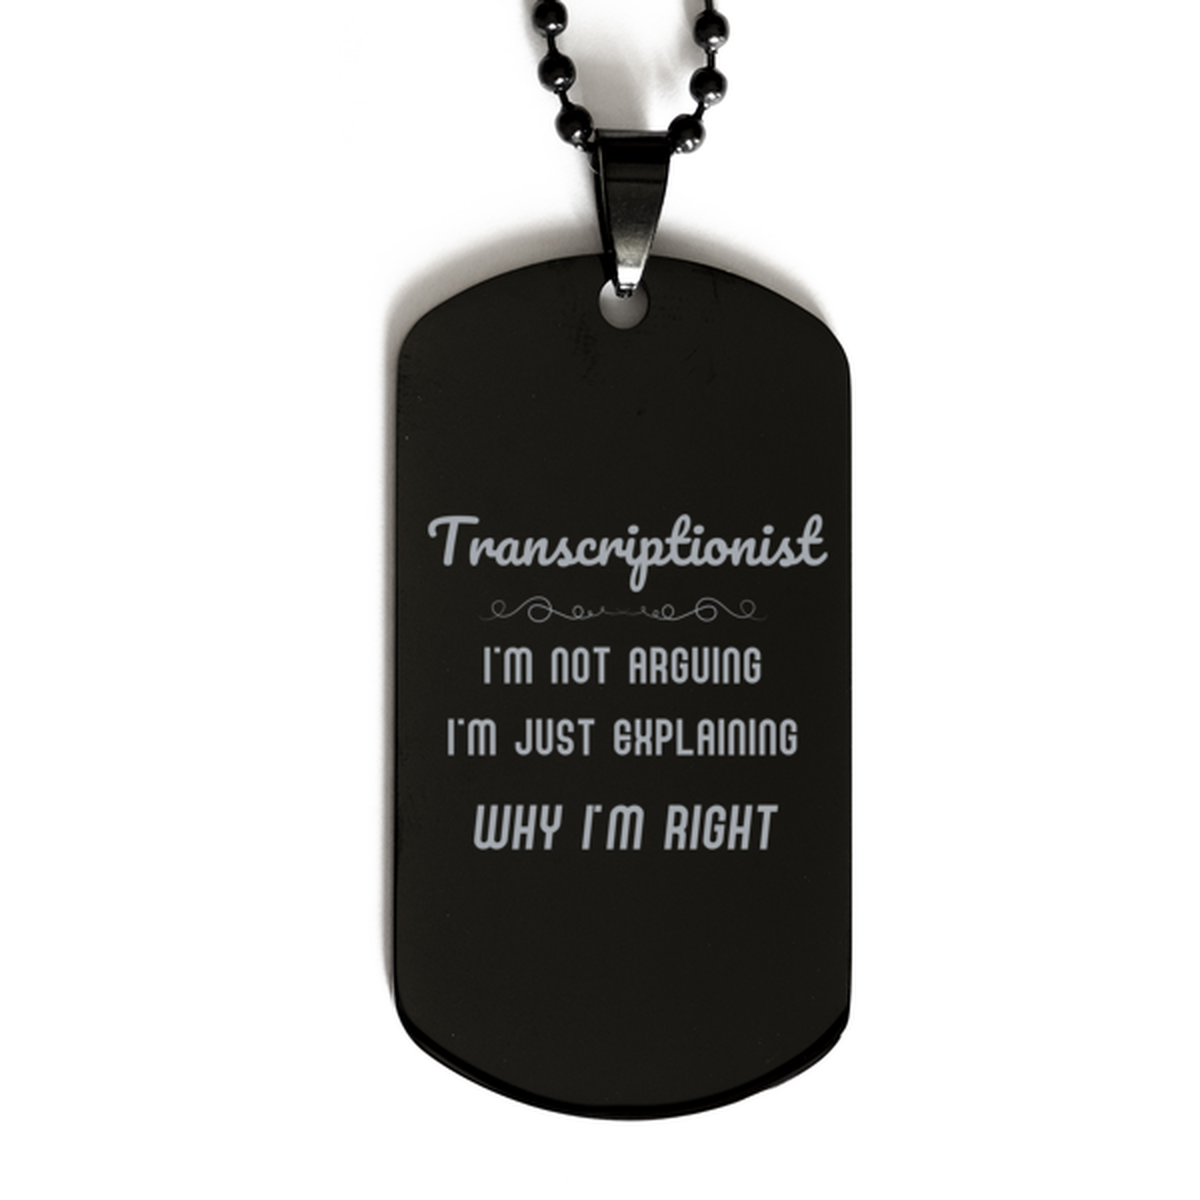 Transcriptionist I'm not Arguing. I'm Just Explaining Why I'm RIGHT Black Dog Tag, Funny Saying Quote Transcriptionist Gifts For Transcriptionist Graduation Birthday Christmas Gifts for Men Women Coworker